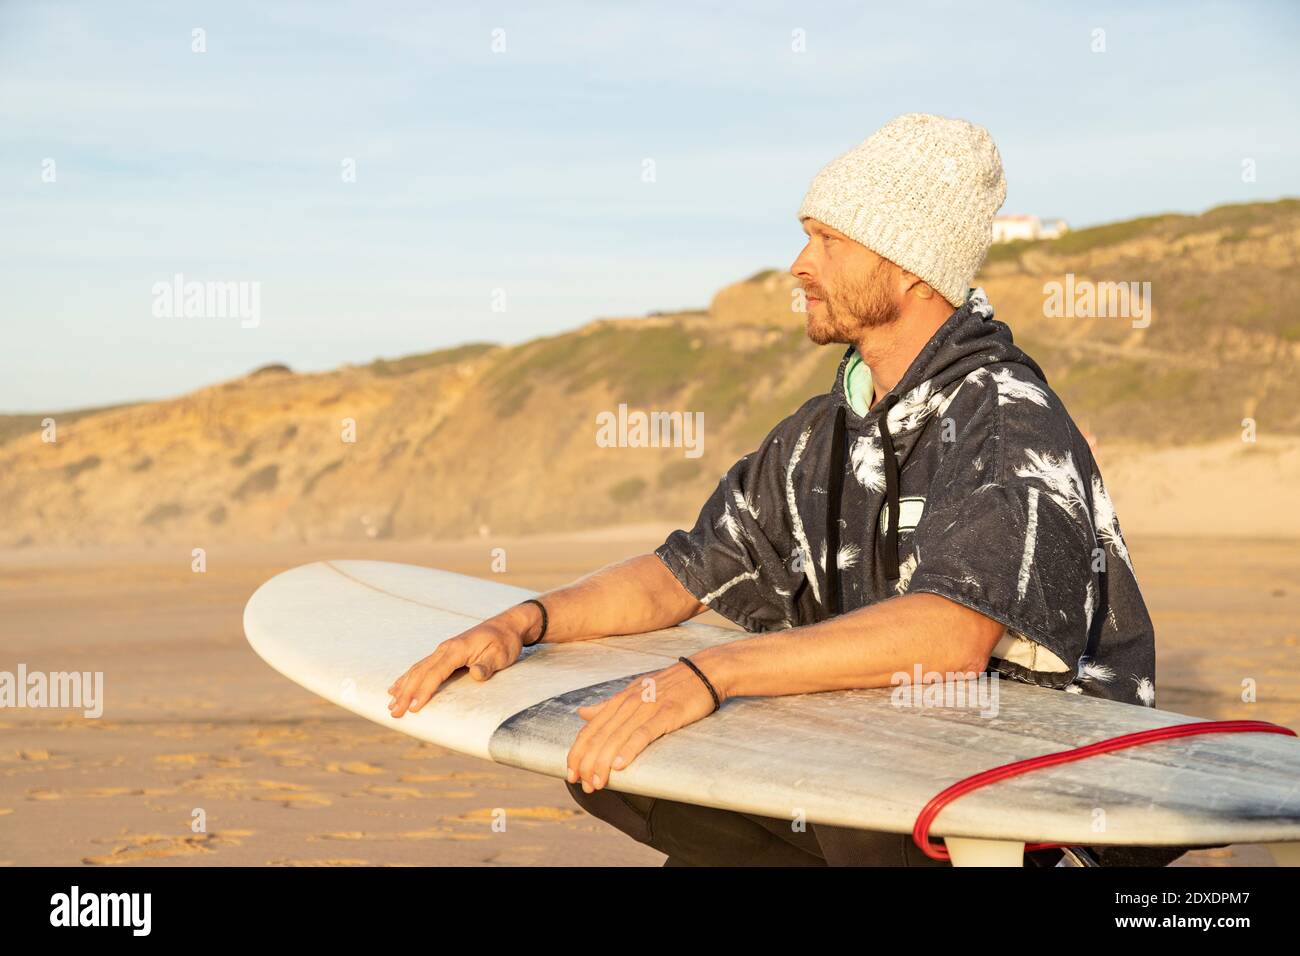 Man looking away while crouching with surfboard at beach Stock Photo